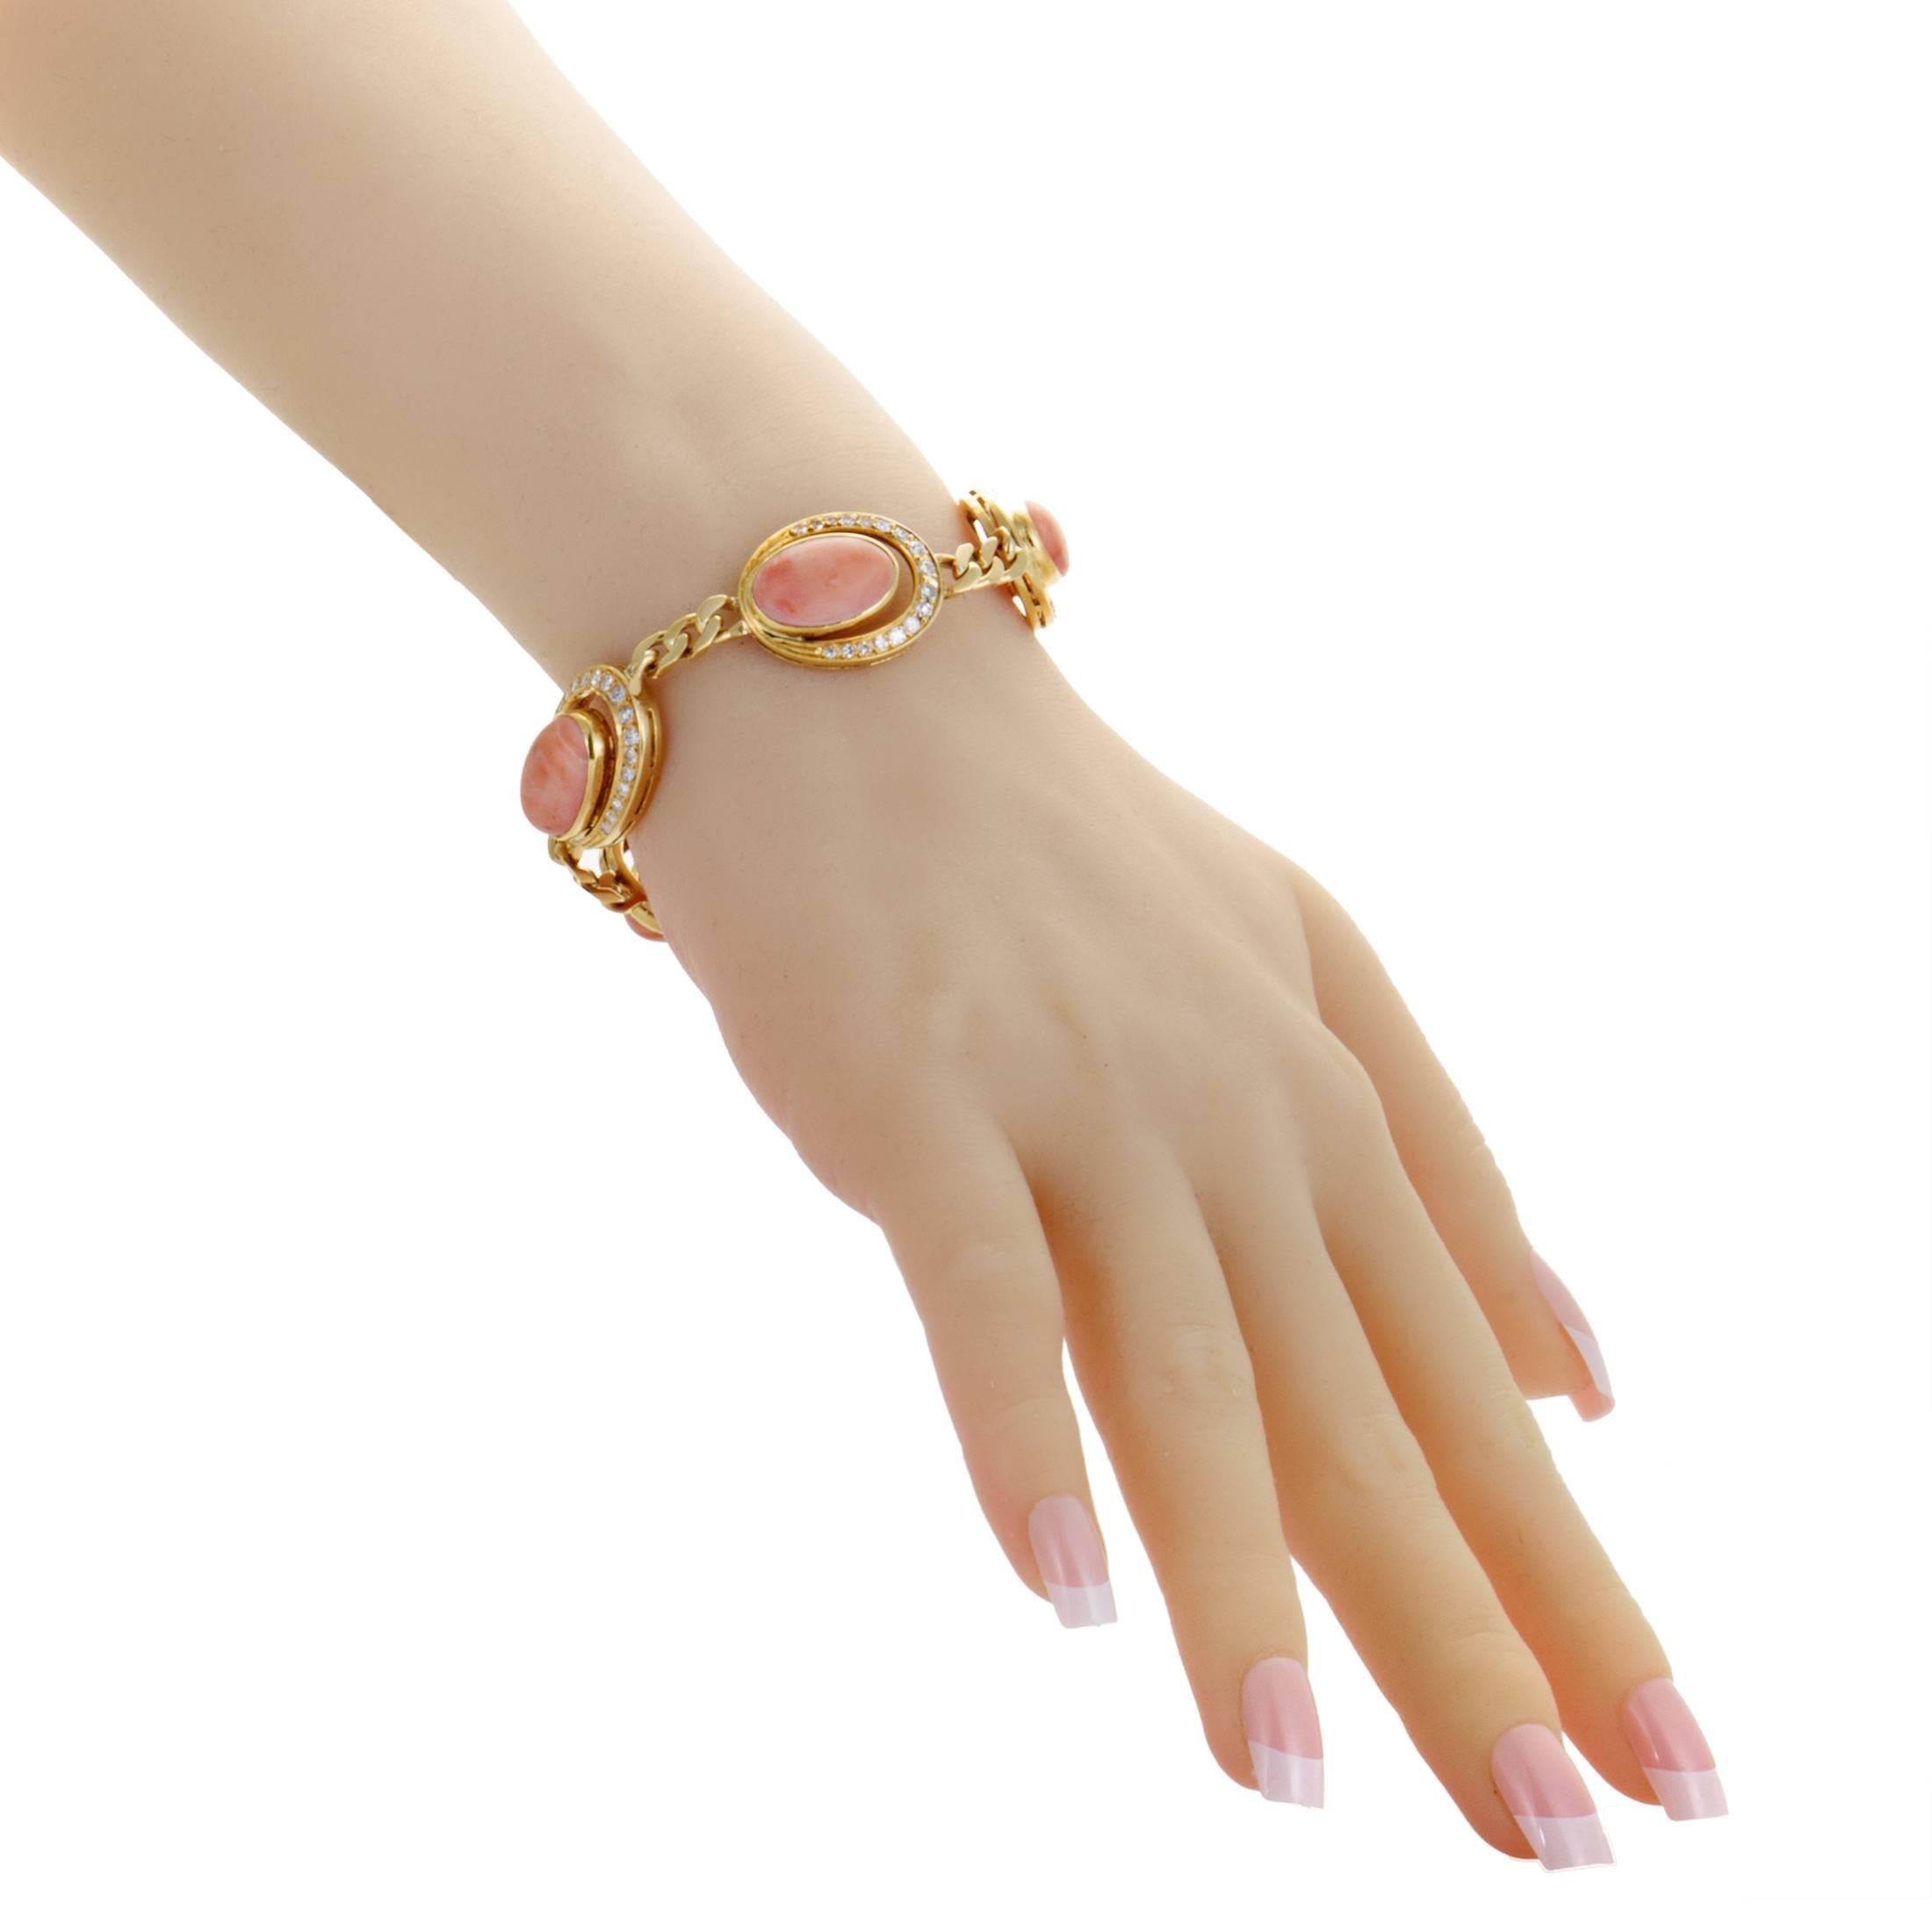 Encircled with approximately 2.00 carats of lustrous diamonds, the marvelous coral stones stand out in brilliant fashion to produce an enchanting vintage allure in this gorgeous 18K yellow gold bracelet which offers a stylish and resolutely feminine